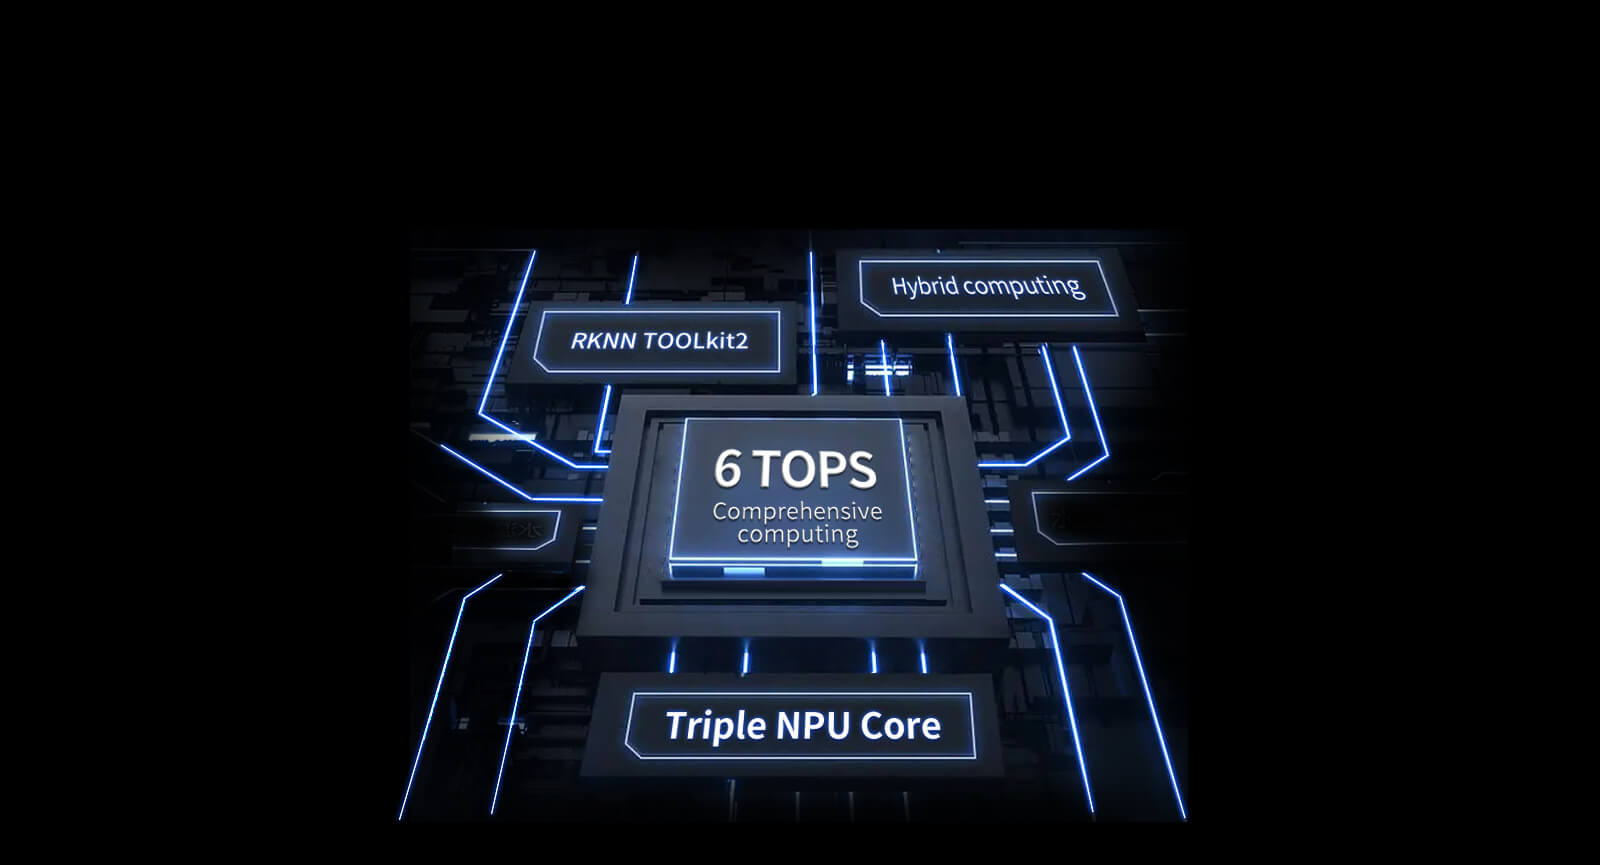 Built-in NPU with high computing power